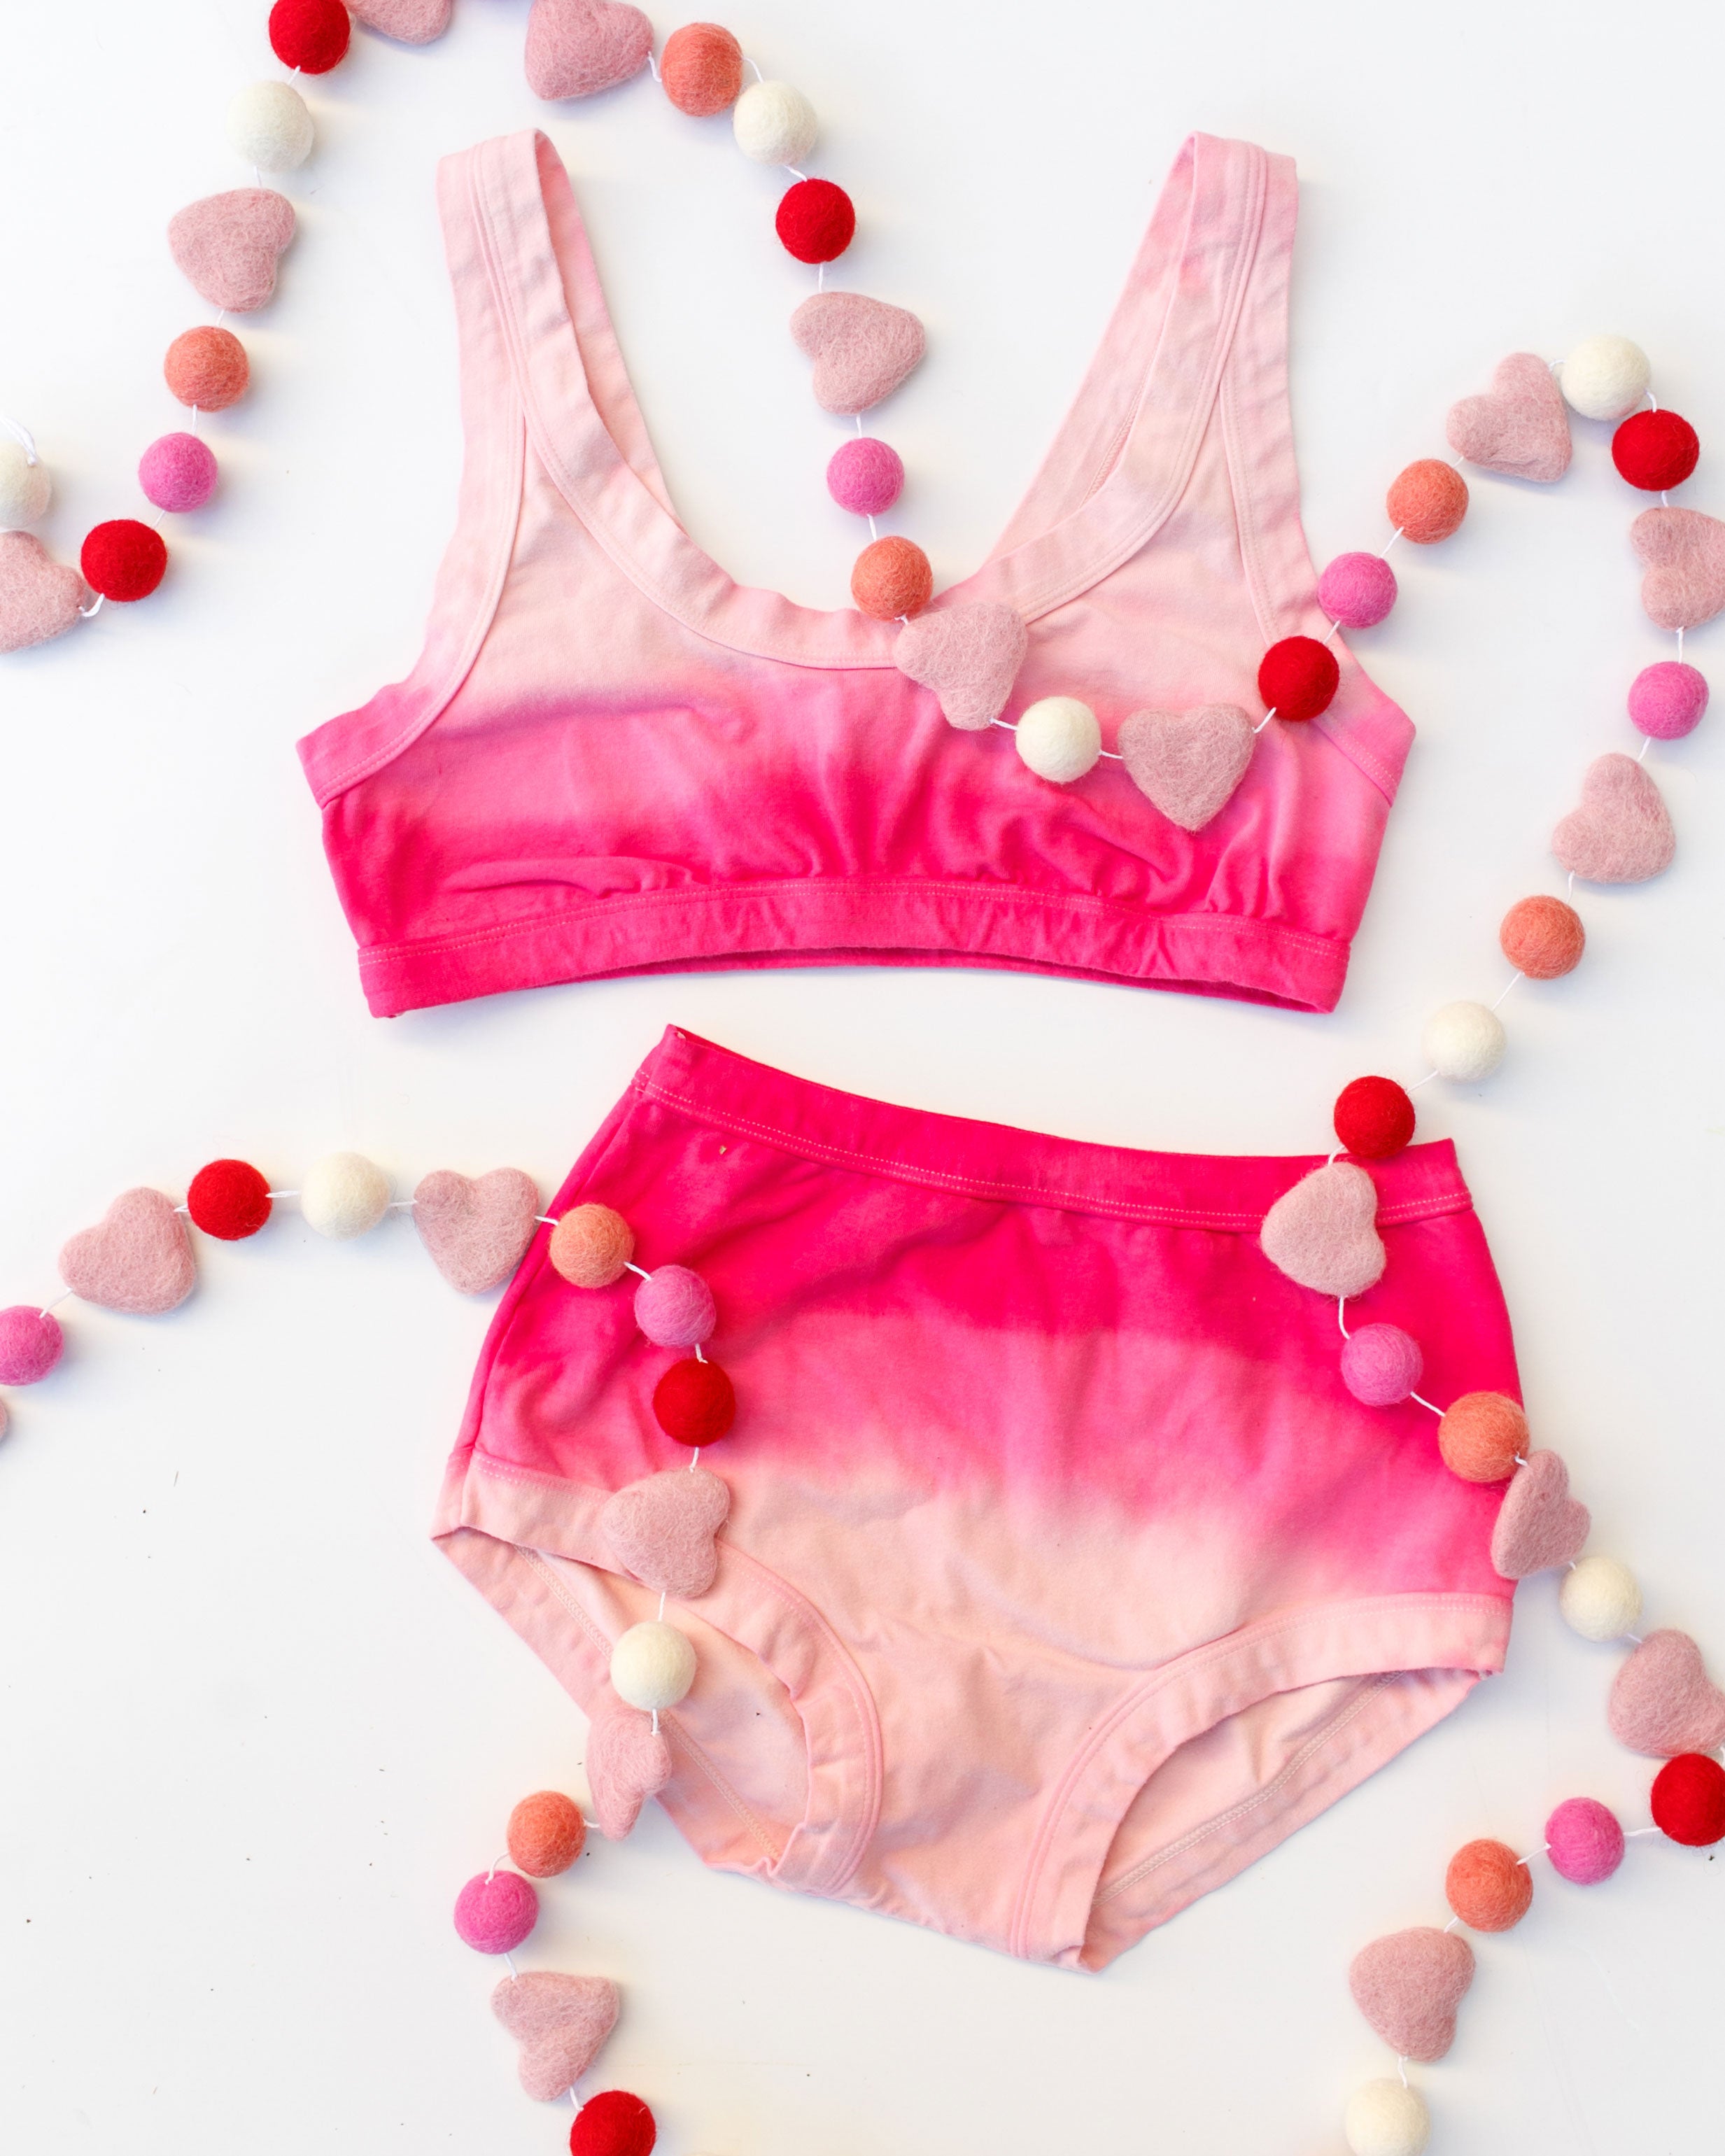 Flat lay of Thunderpants organic cotton Bralette and Original Underwear in Valentine's Day Dip Dye ombre pinks with a heart garland.